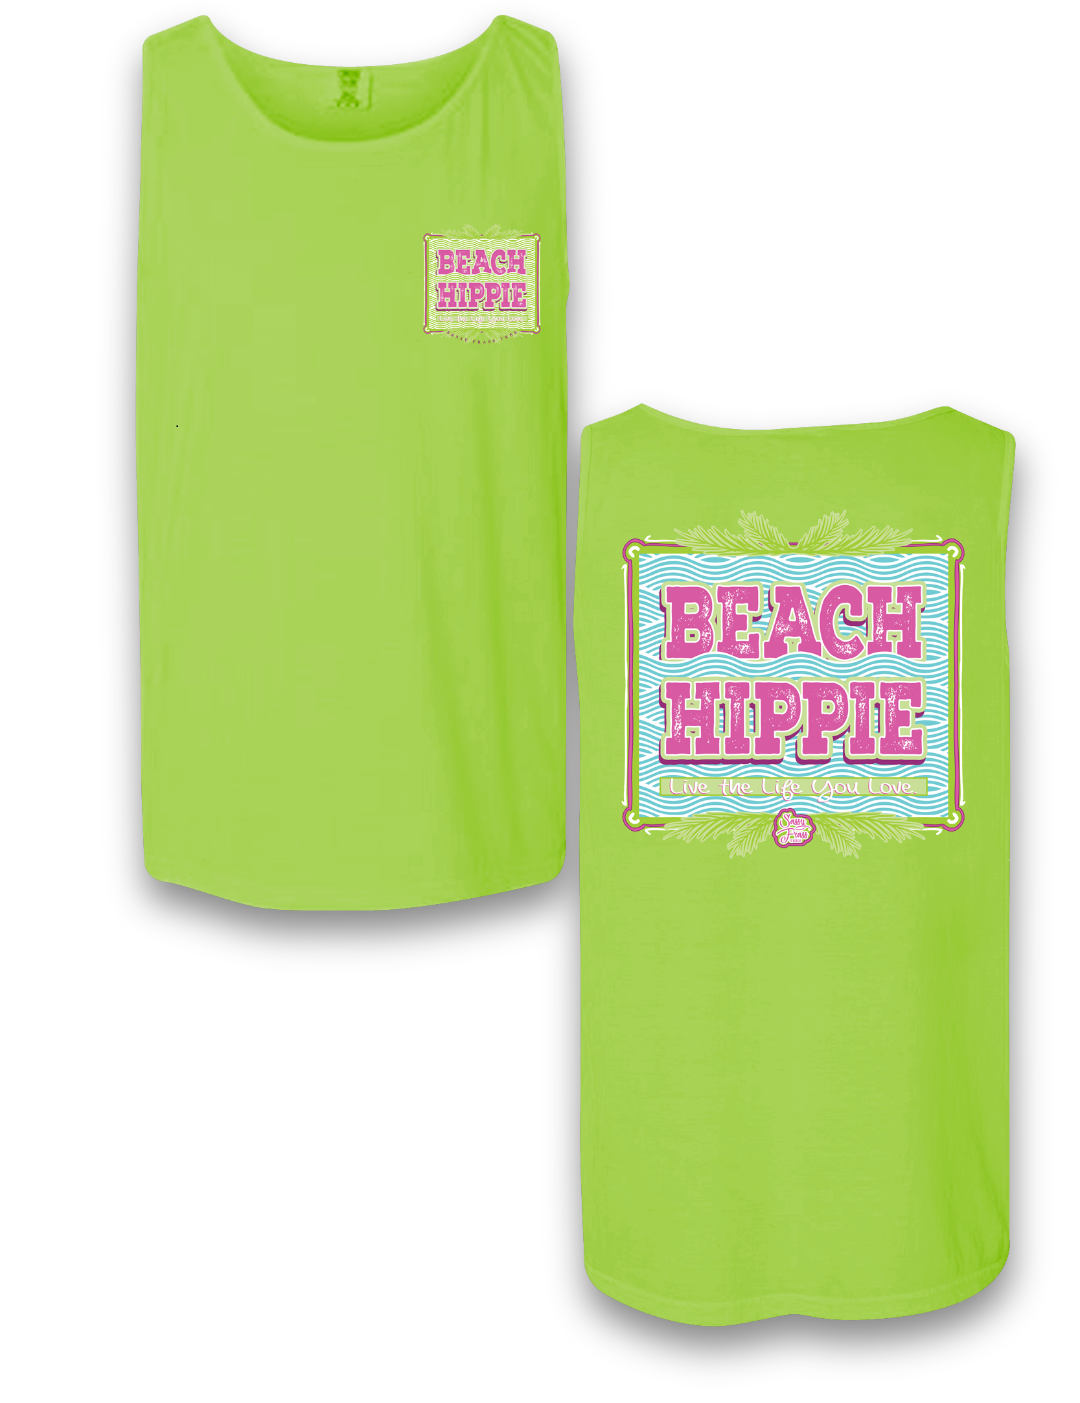 Sassy Frass Beach Hippie Live the Life You Love Comfort Colors Bright T Shirt Tank Top